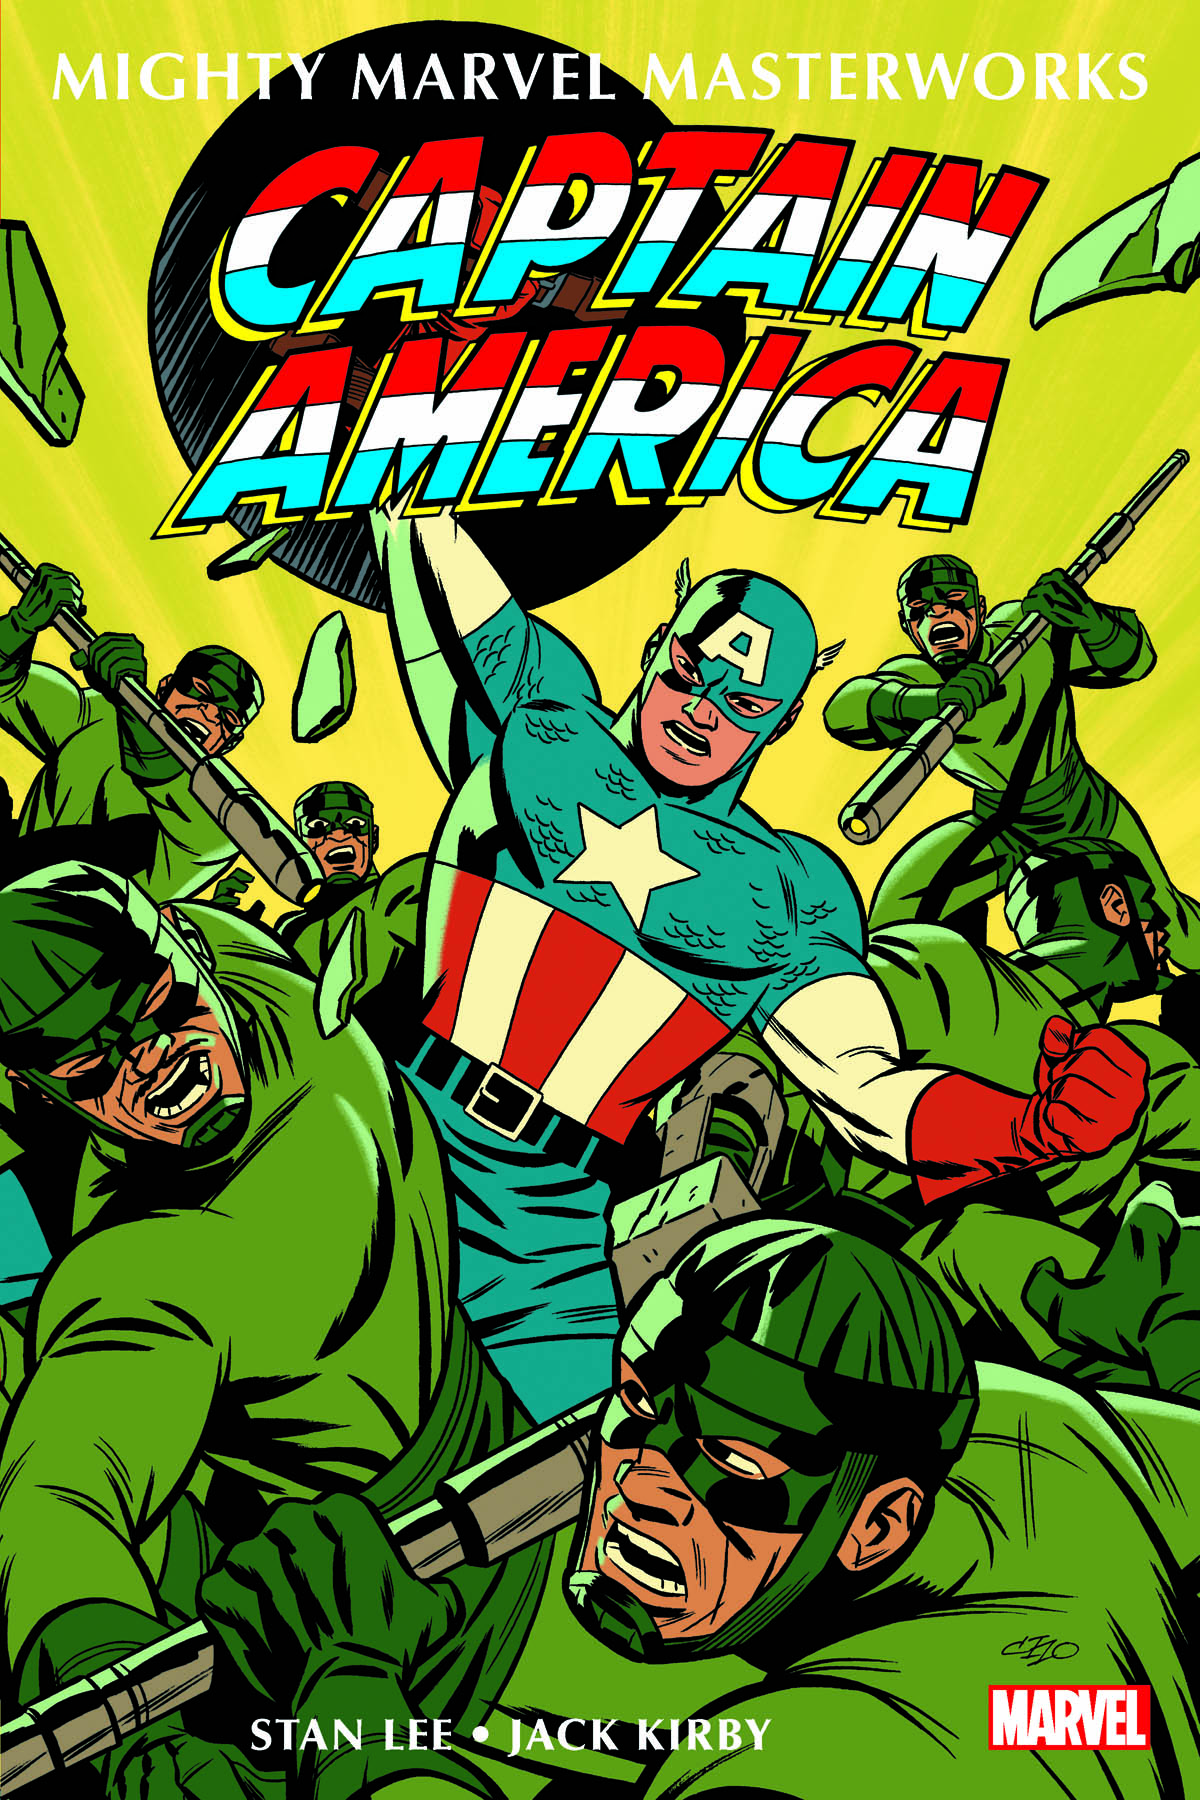 Mighty Marvel Masterworks: Captain America Vol. 1 - The Sentinel Of Liberty (Trade Paperback)